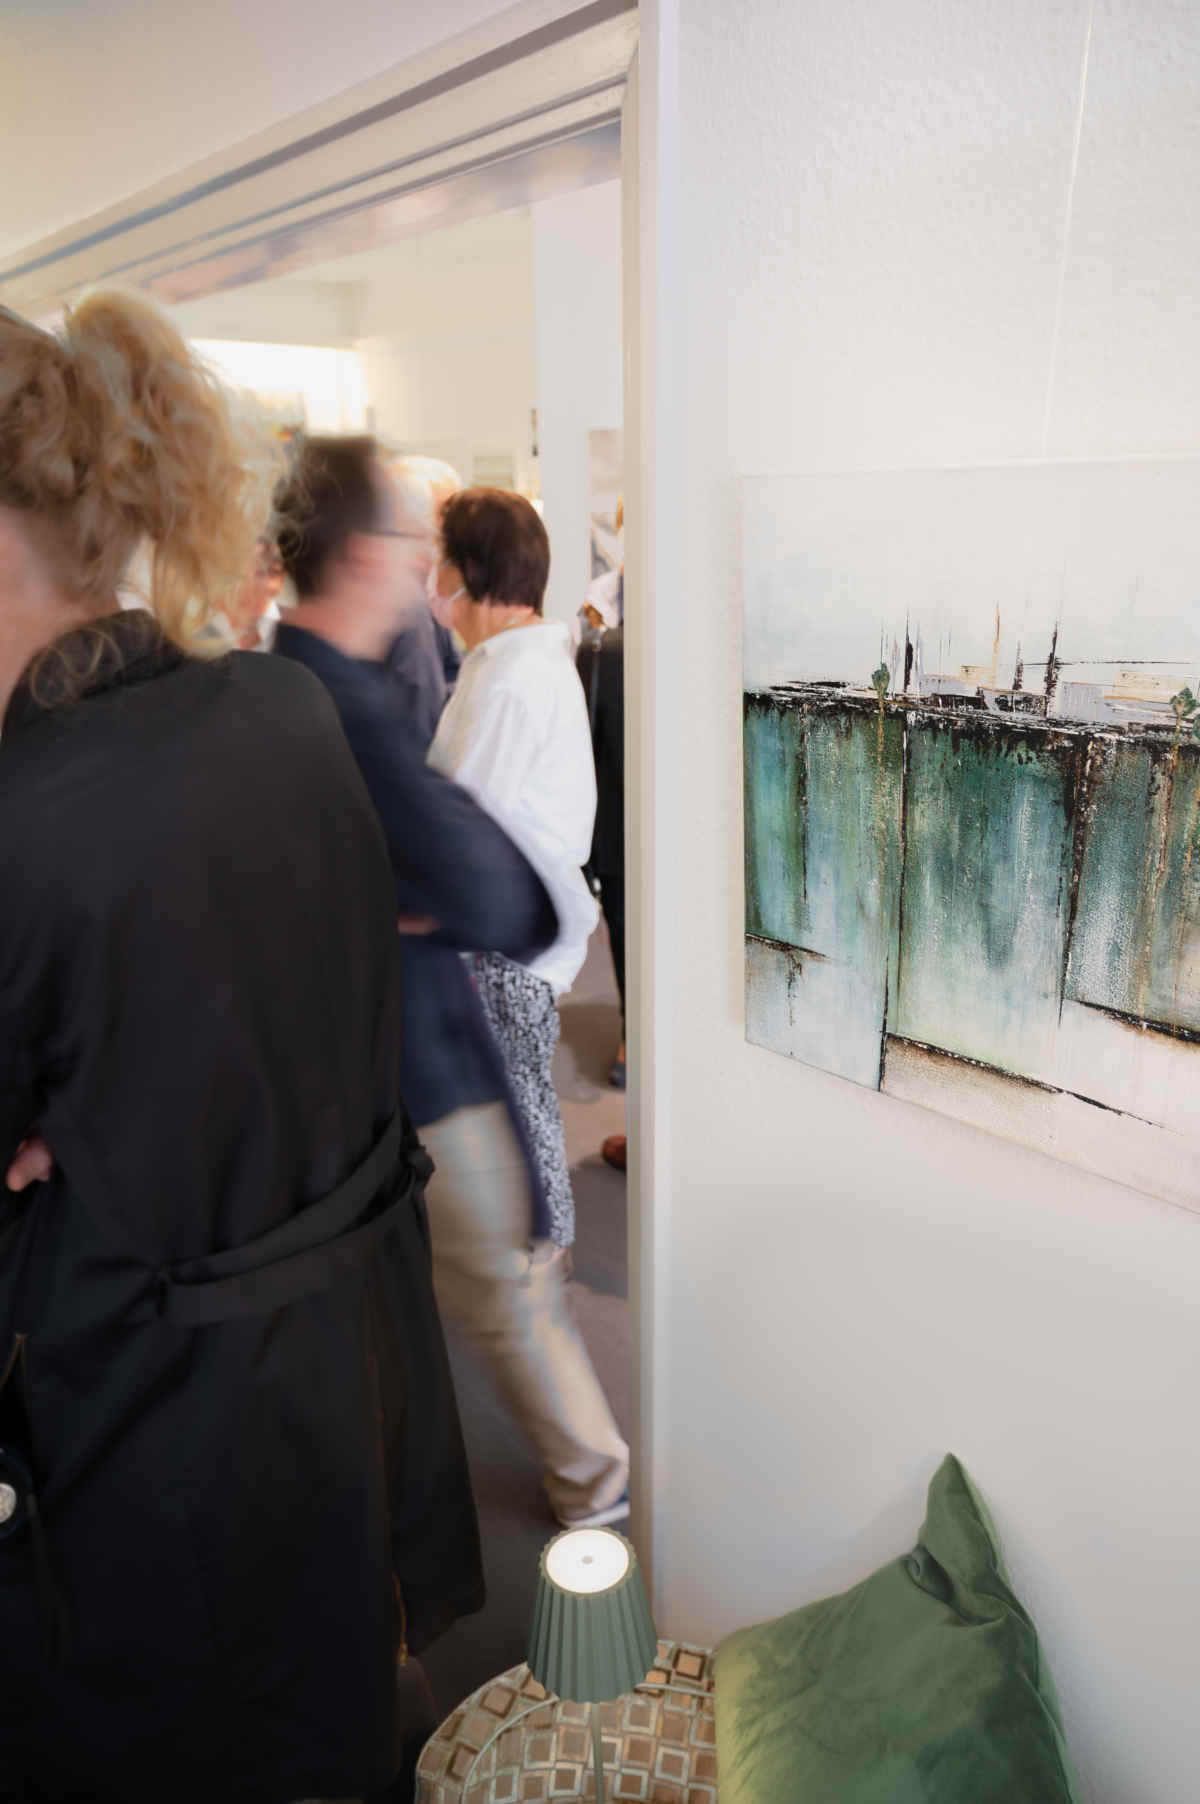 Guests at Nina Groth´s vernissage of the exhibition "City & Water - Living Harmony" at KOCH - DIE RAUMHANDWERKEREI